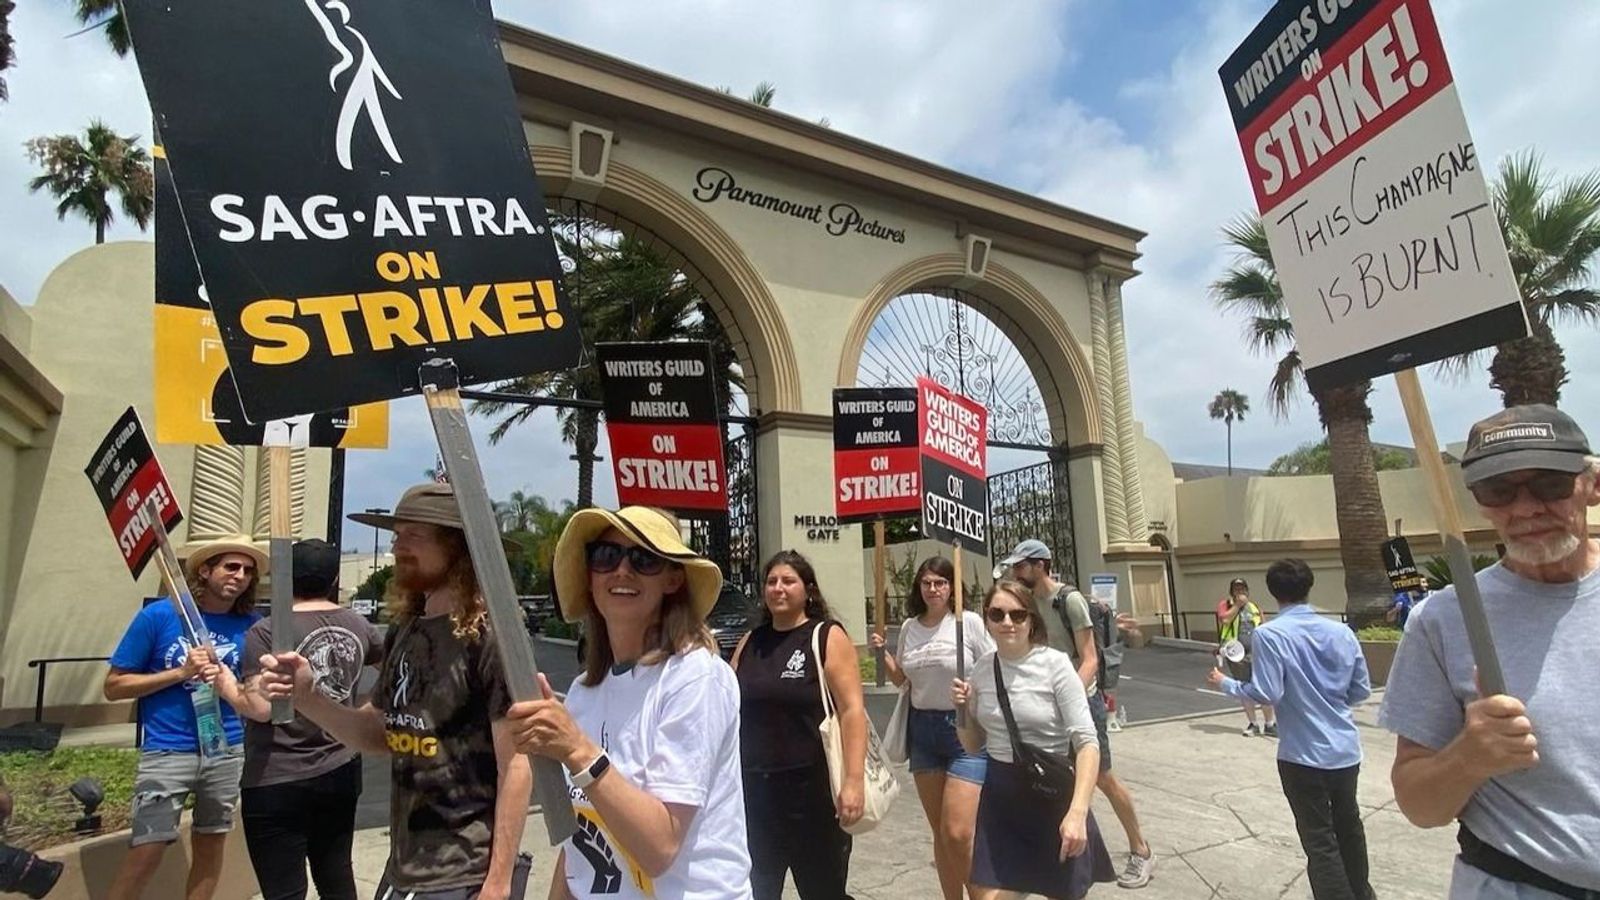 Many actors, stunt workers, and now production assistants oppose tentative SAG-AFTRA agreement